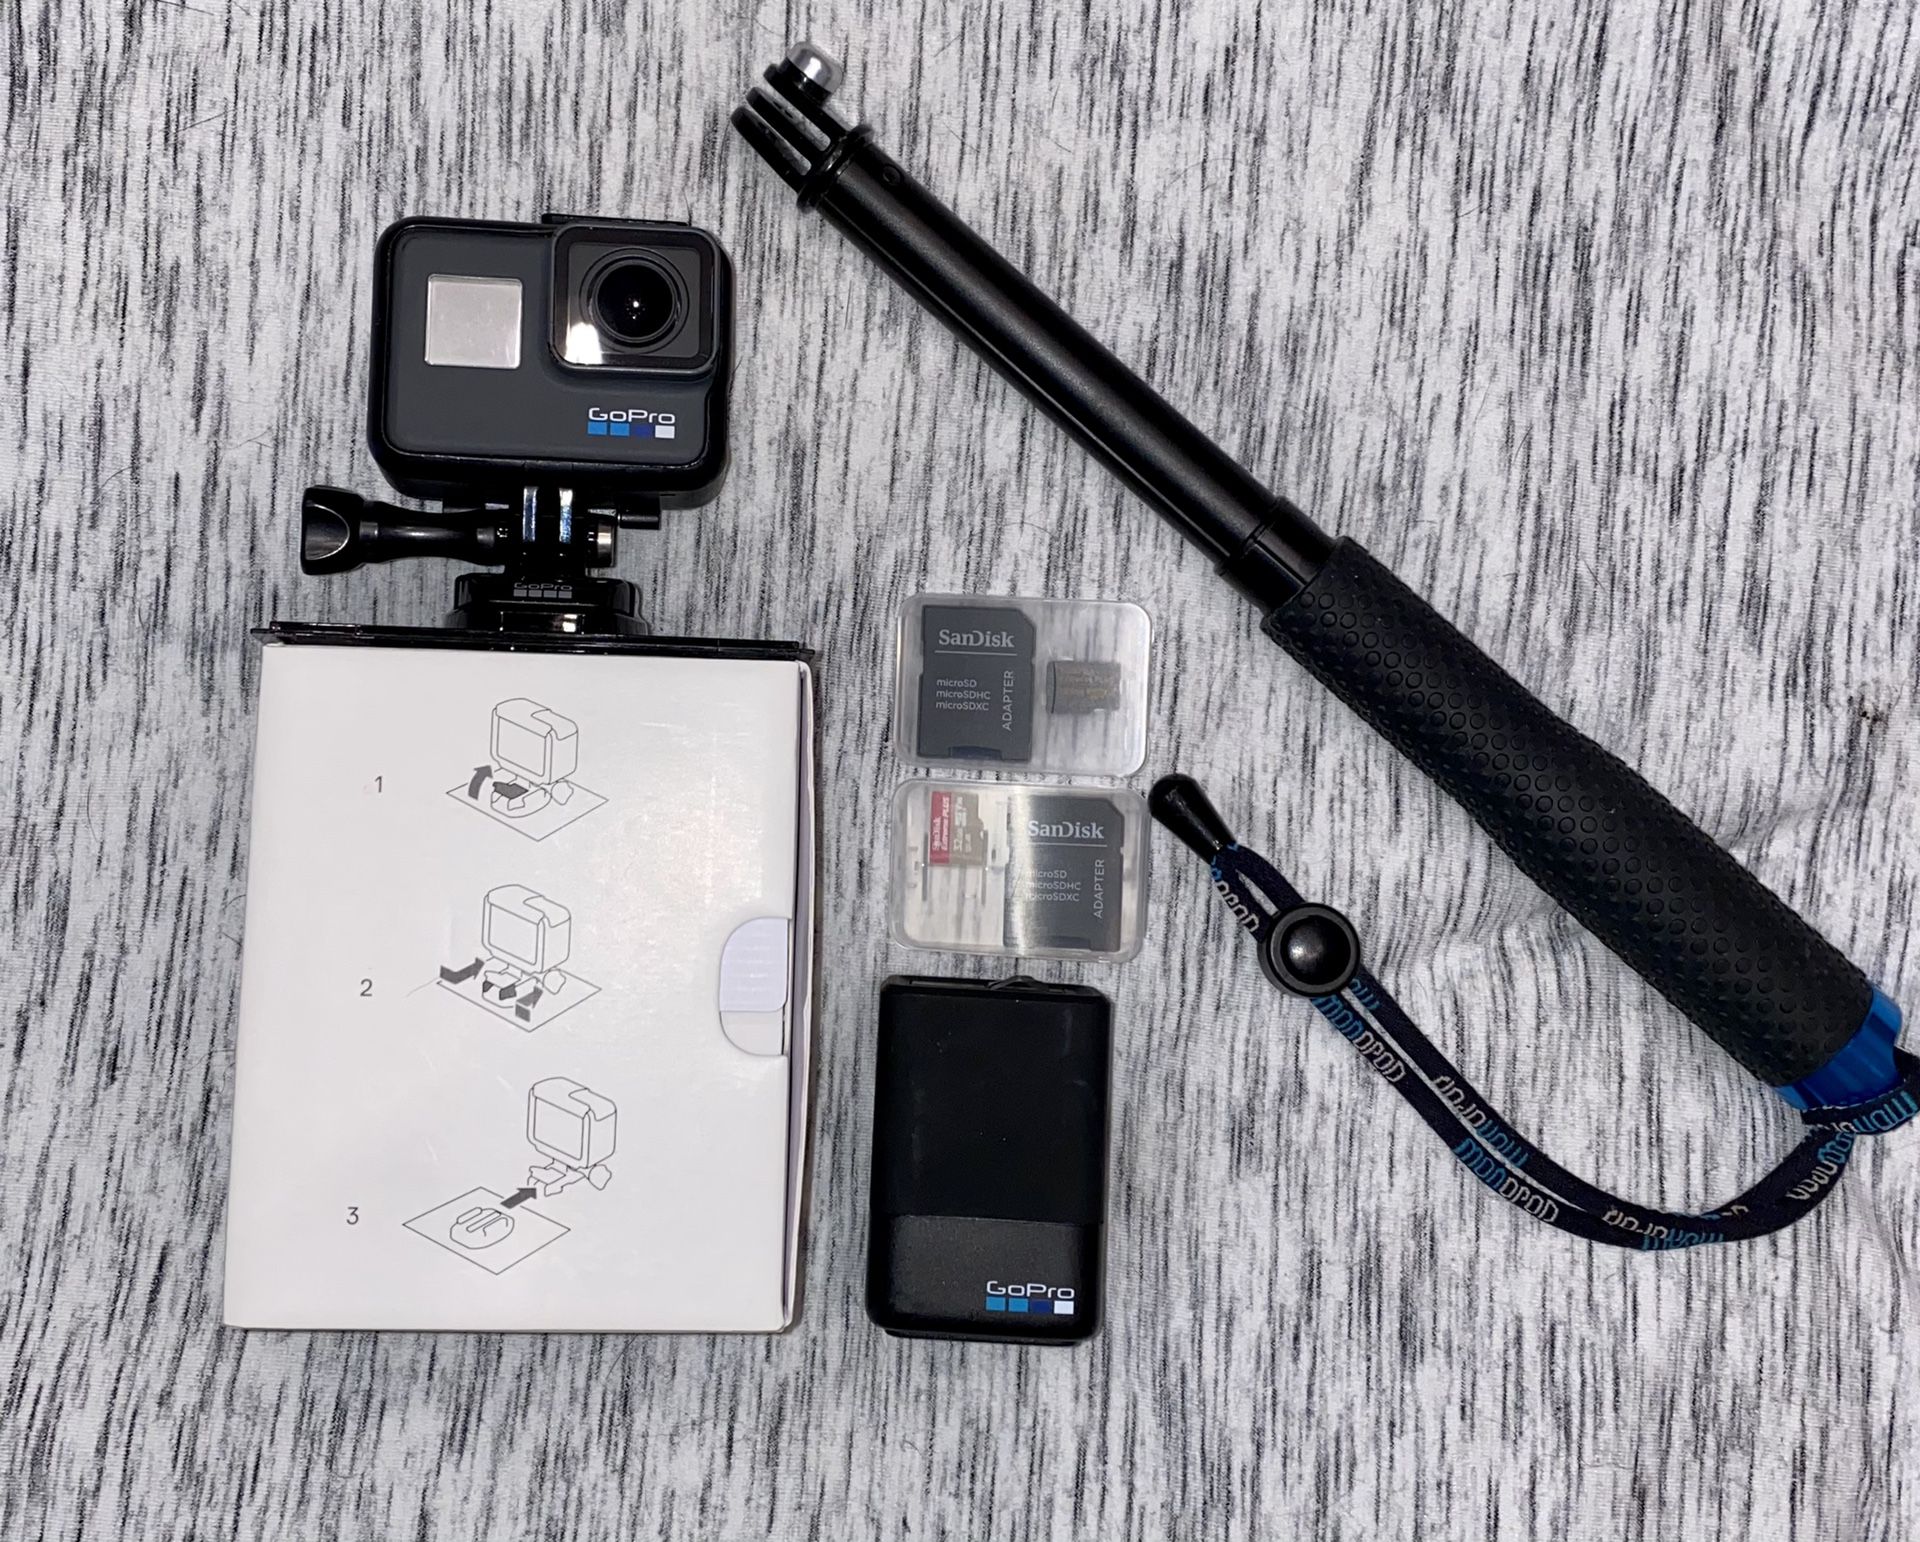 GoPro Hero 6 w/ extra battery, charging case, selfie stick, and 2 SD cards